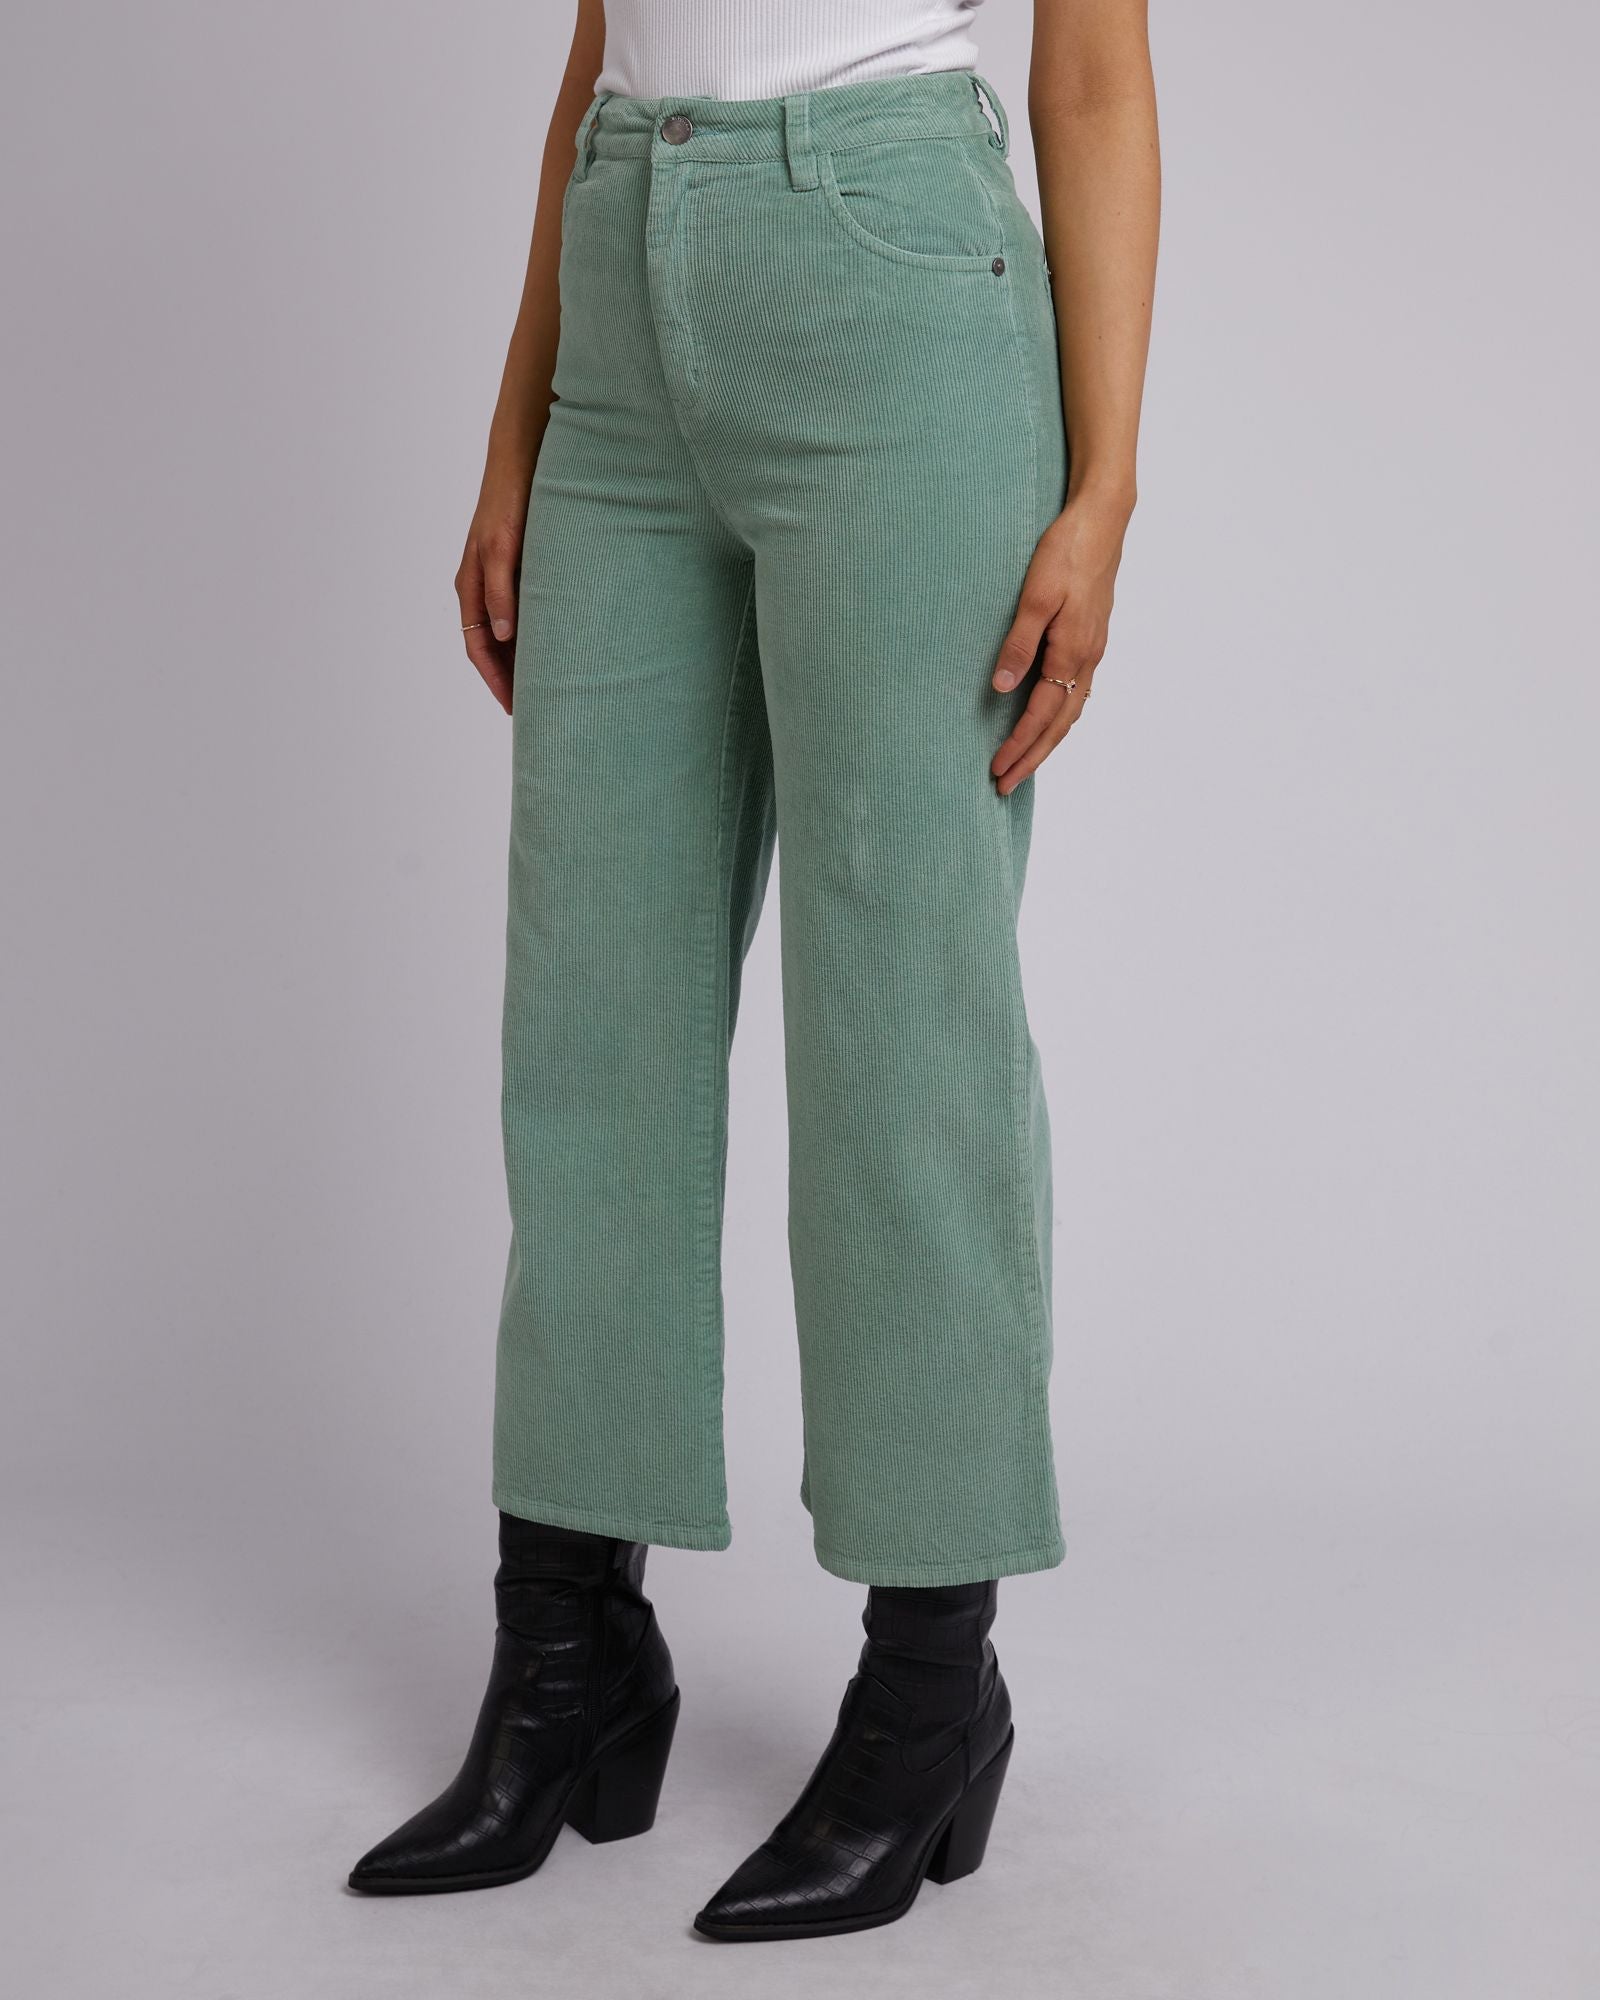 All About Eve Camilla Cord Pant [COLOUR:Sage SIZE:6]